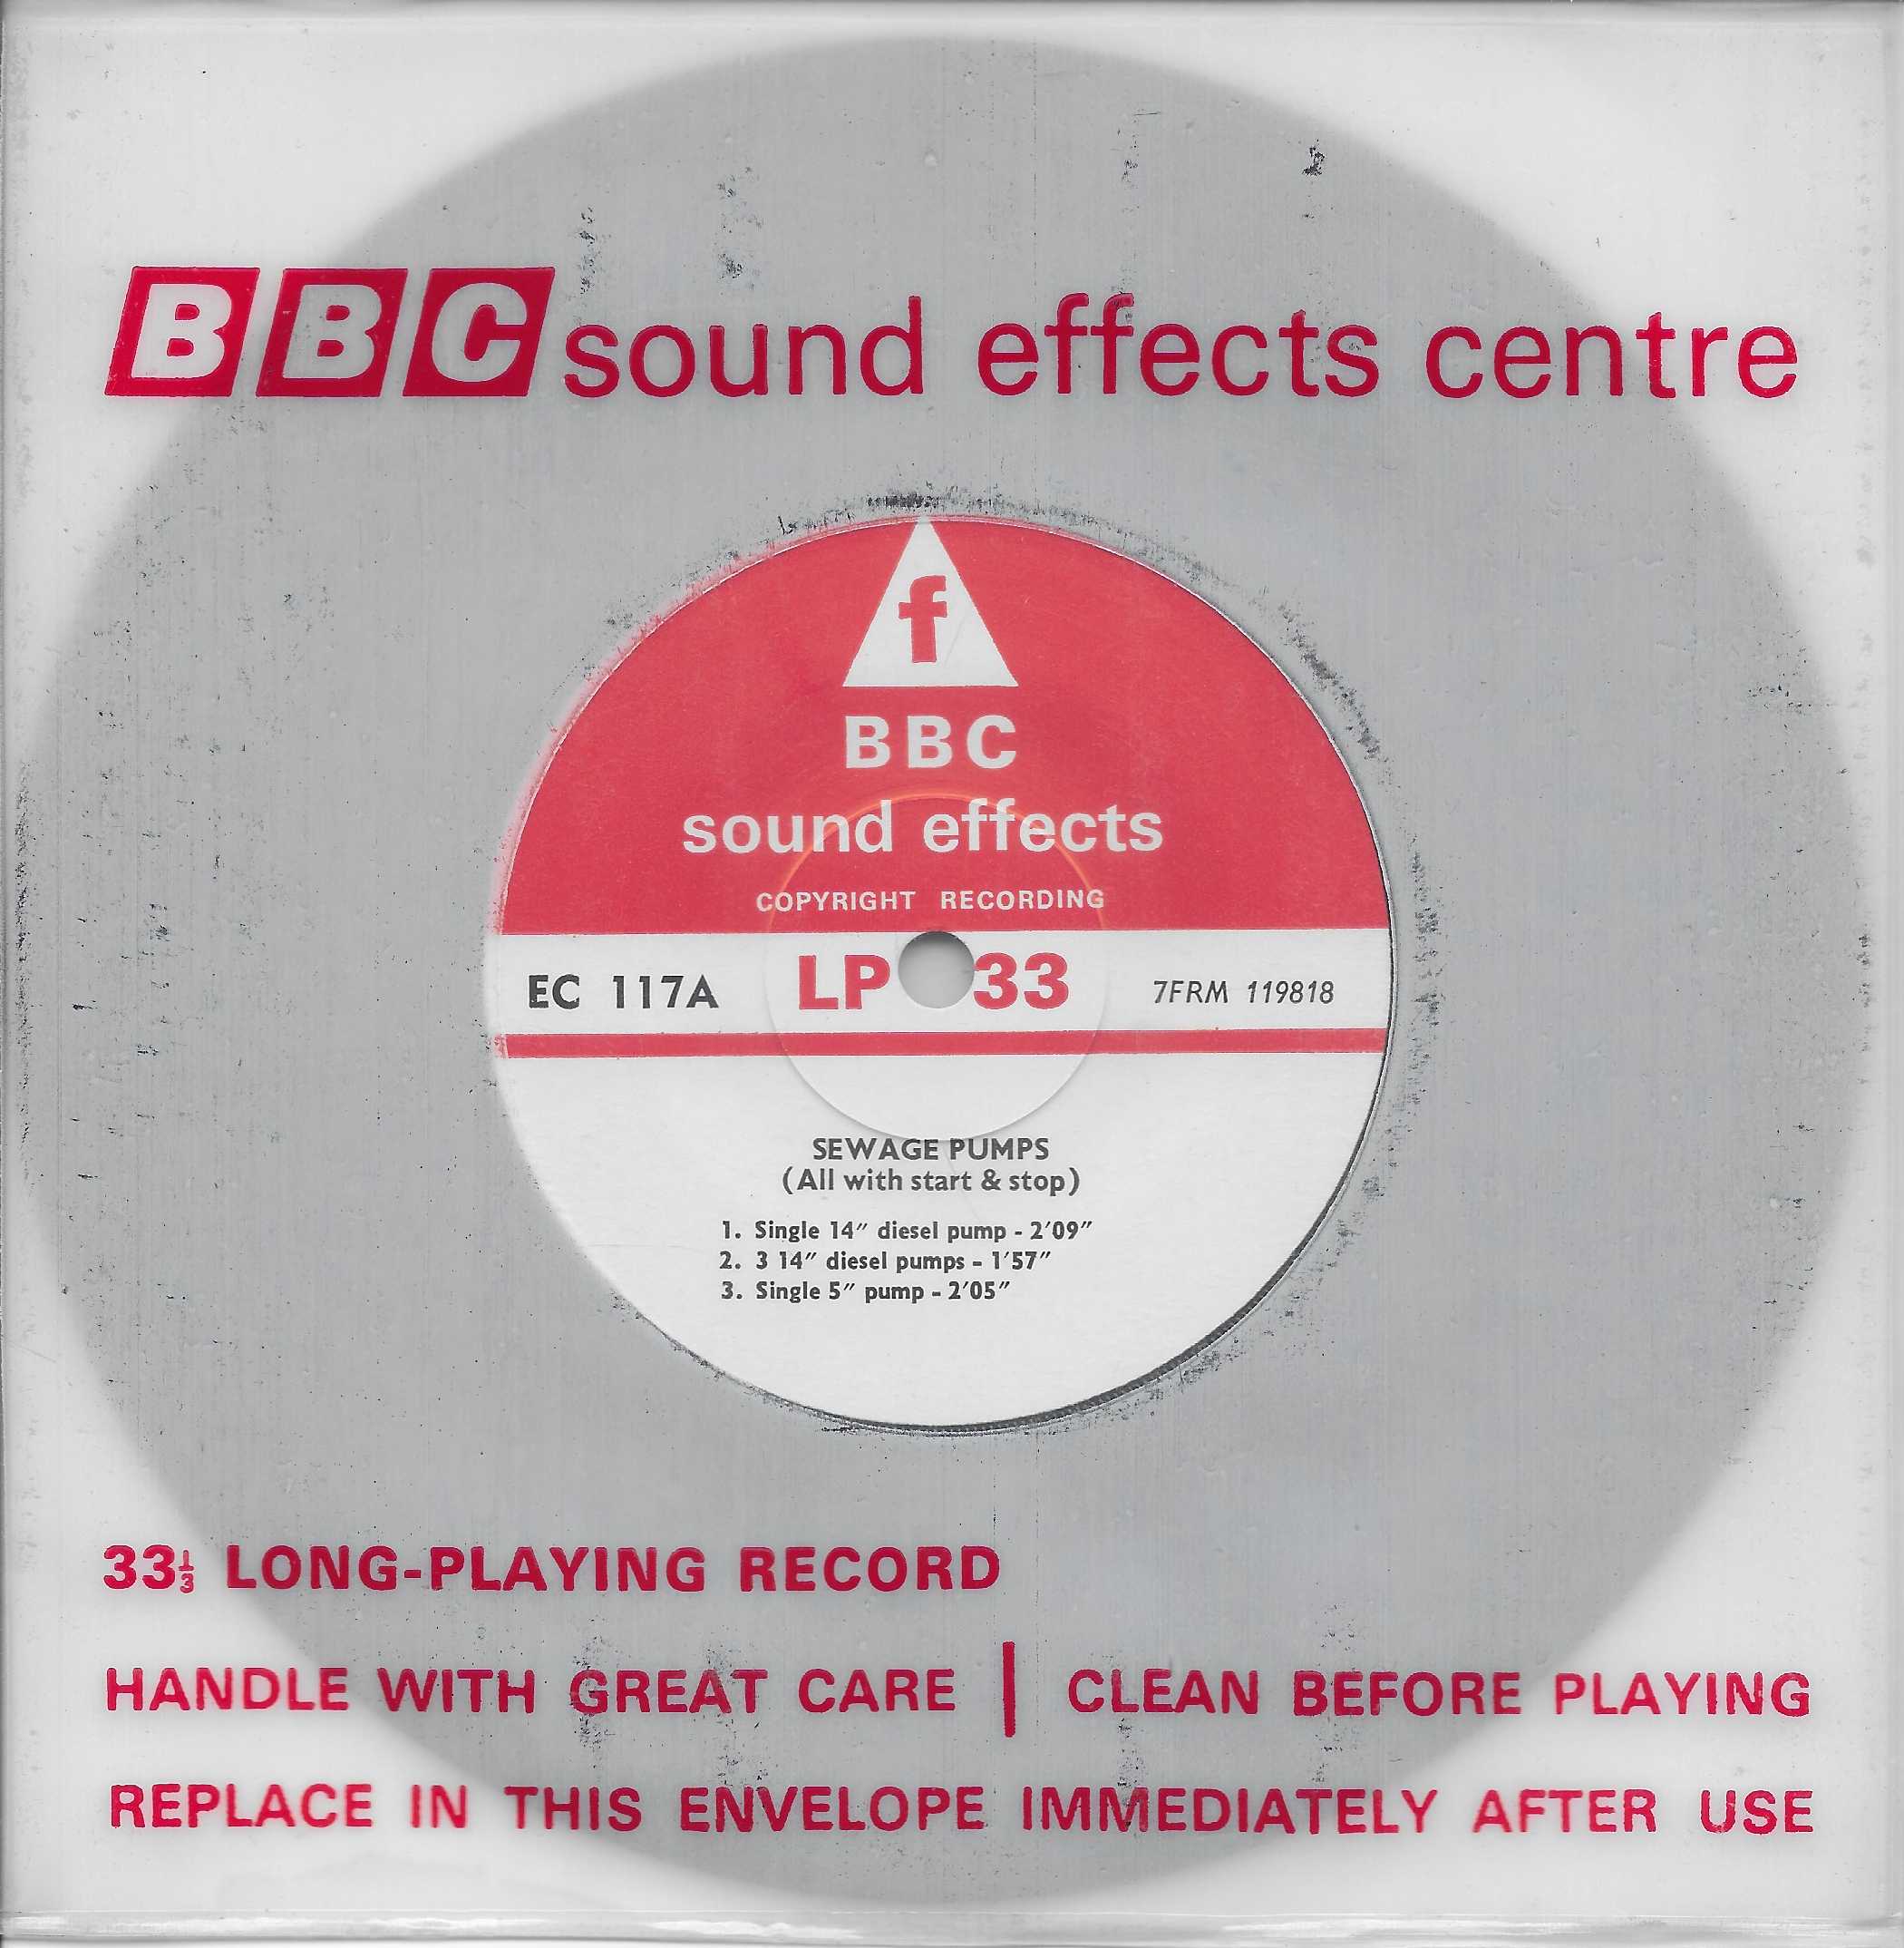 Picture of EC 117A Sewage pumps (All with start) by artist Not registered from the BBC singles - Records and Tapes library